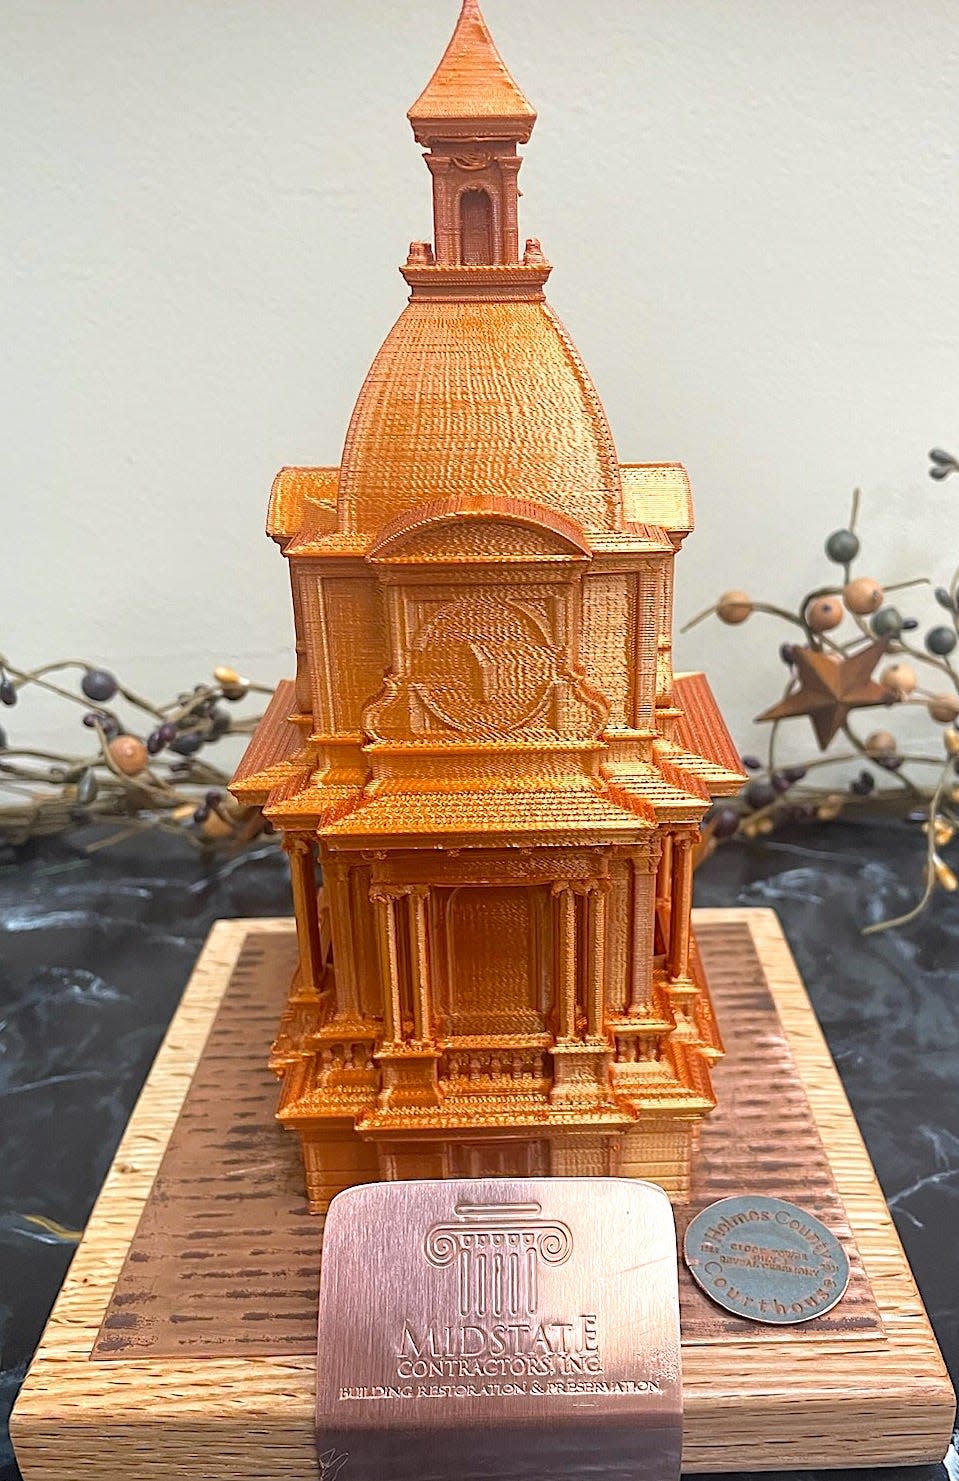 A three-dimensional print of the top of the recently renovated Holmes County Courthouse by Midstate Construction.